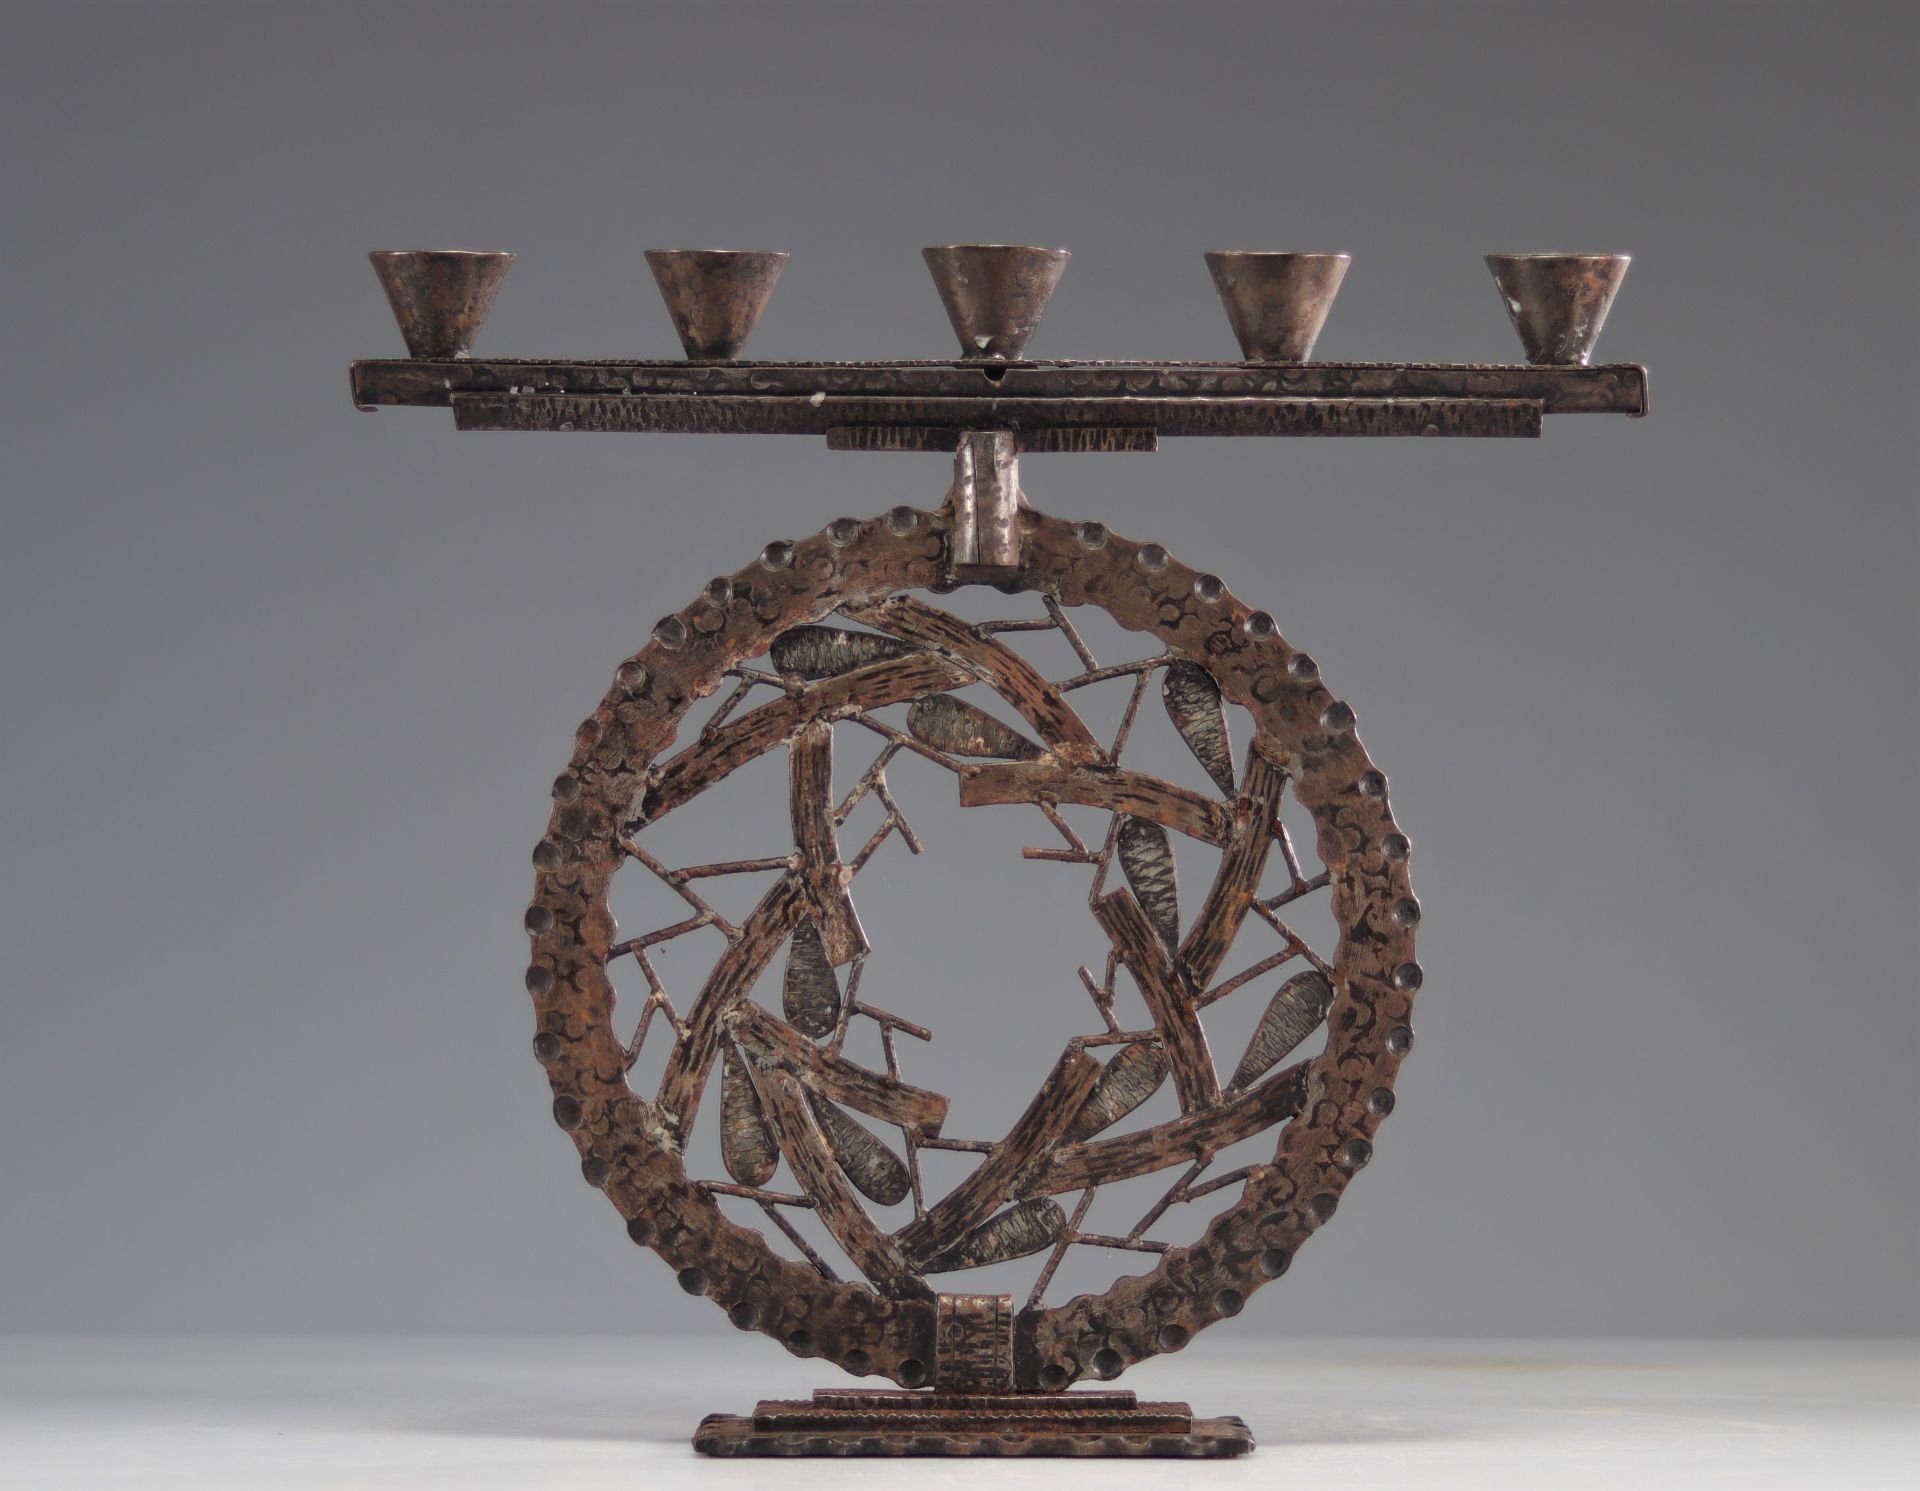 Large Art Deco wrought iron candlestick with pine cones decor - Image 3 of 3